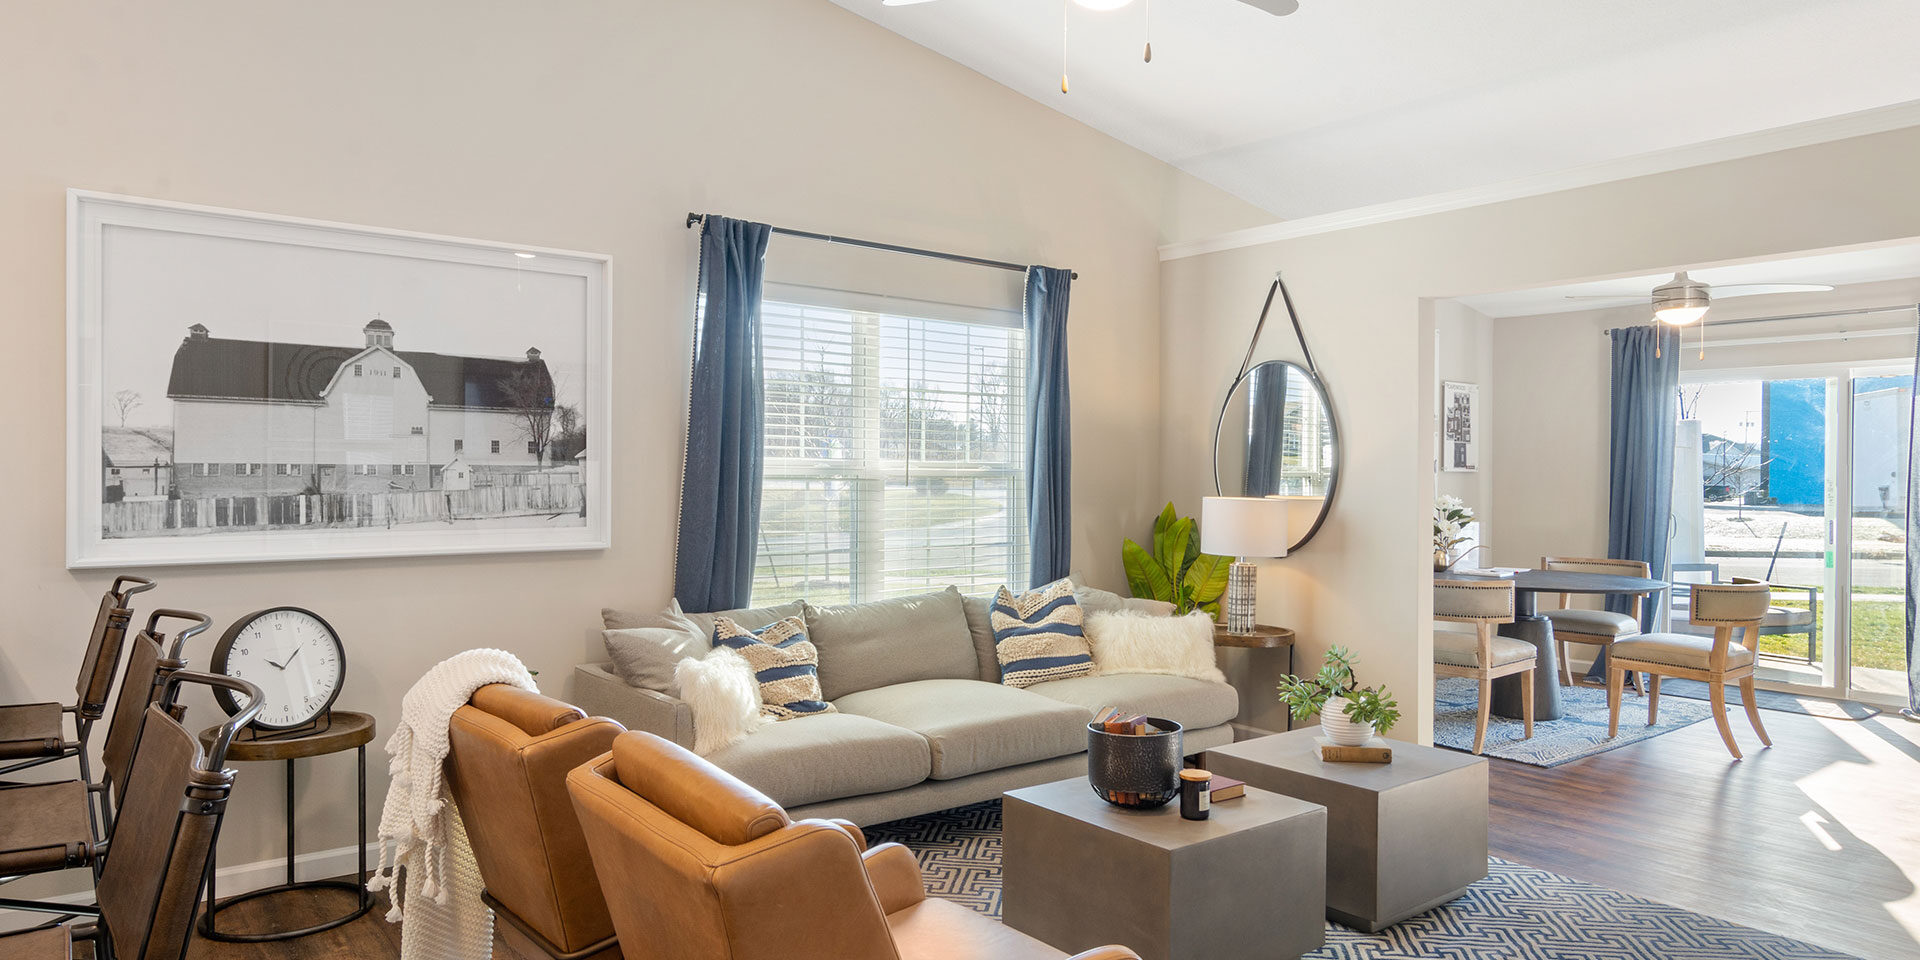 renting furniture for apartment living pros and cons